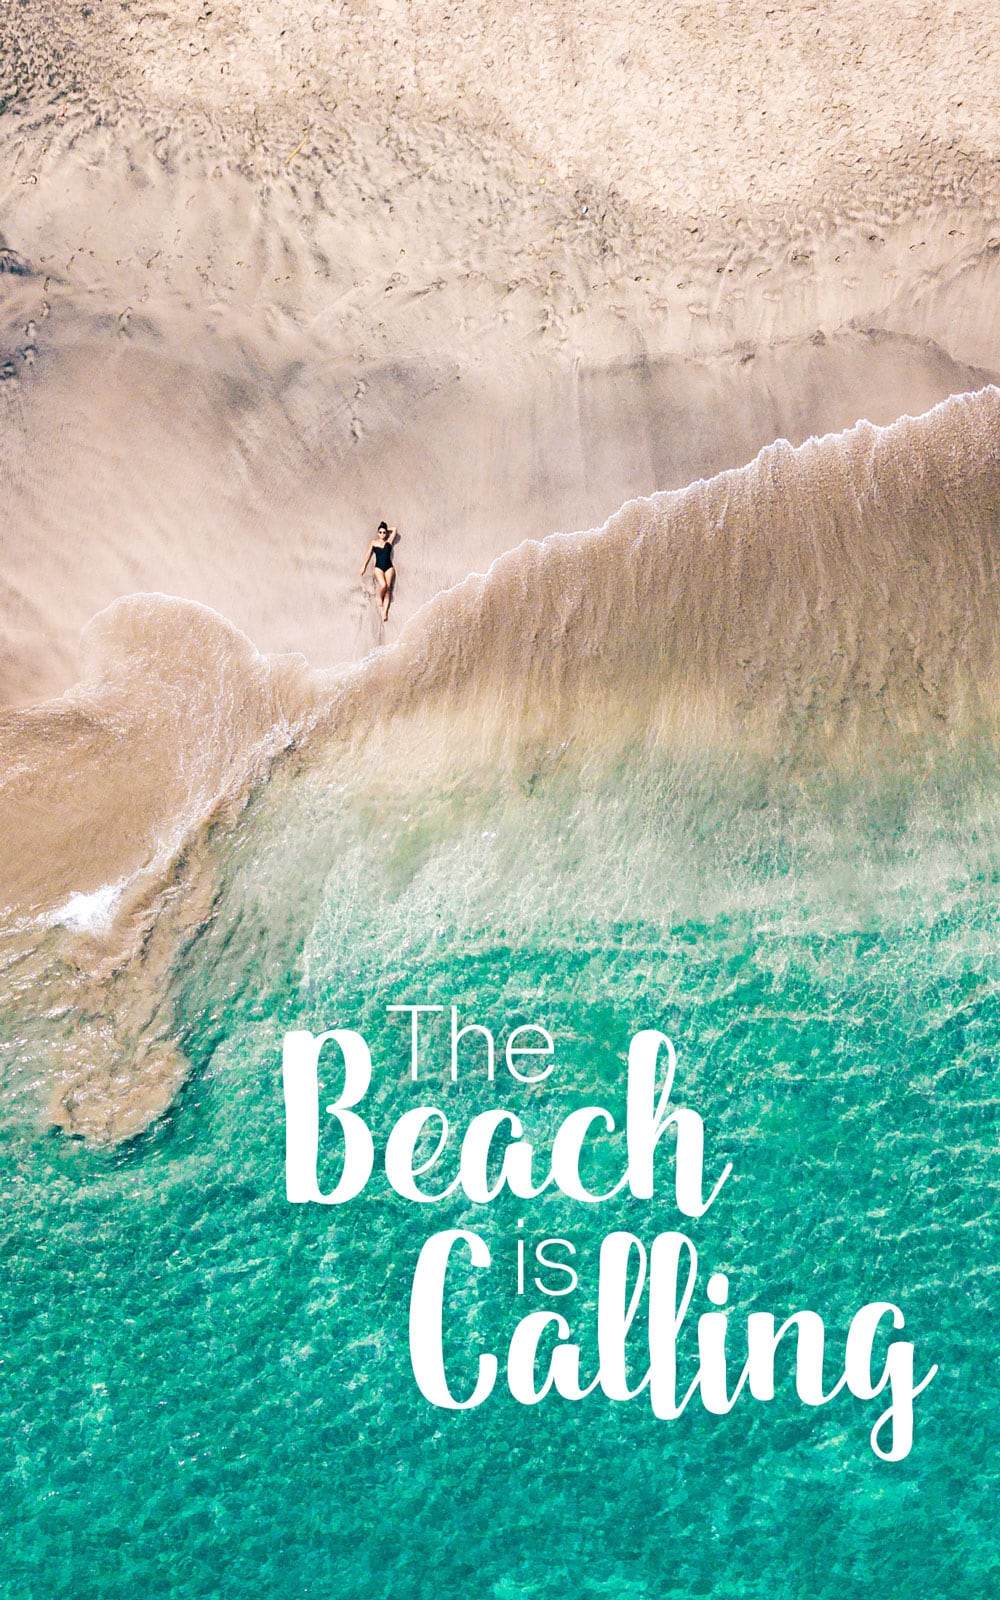 Short & Funny Beach Quotes on Love & Life   12 Beach Quotes